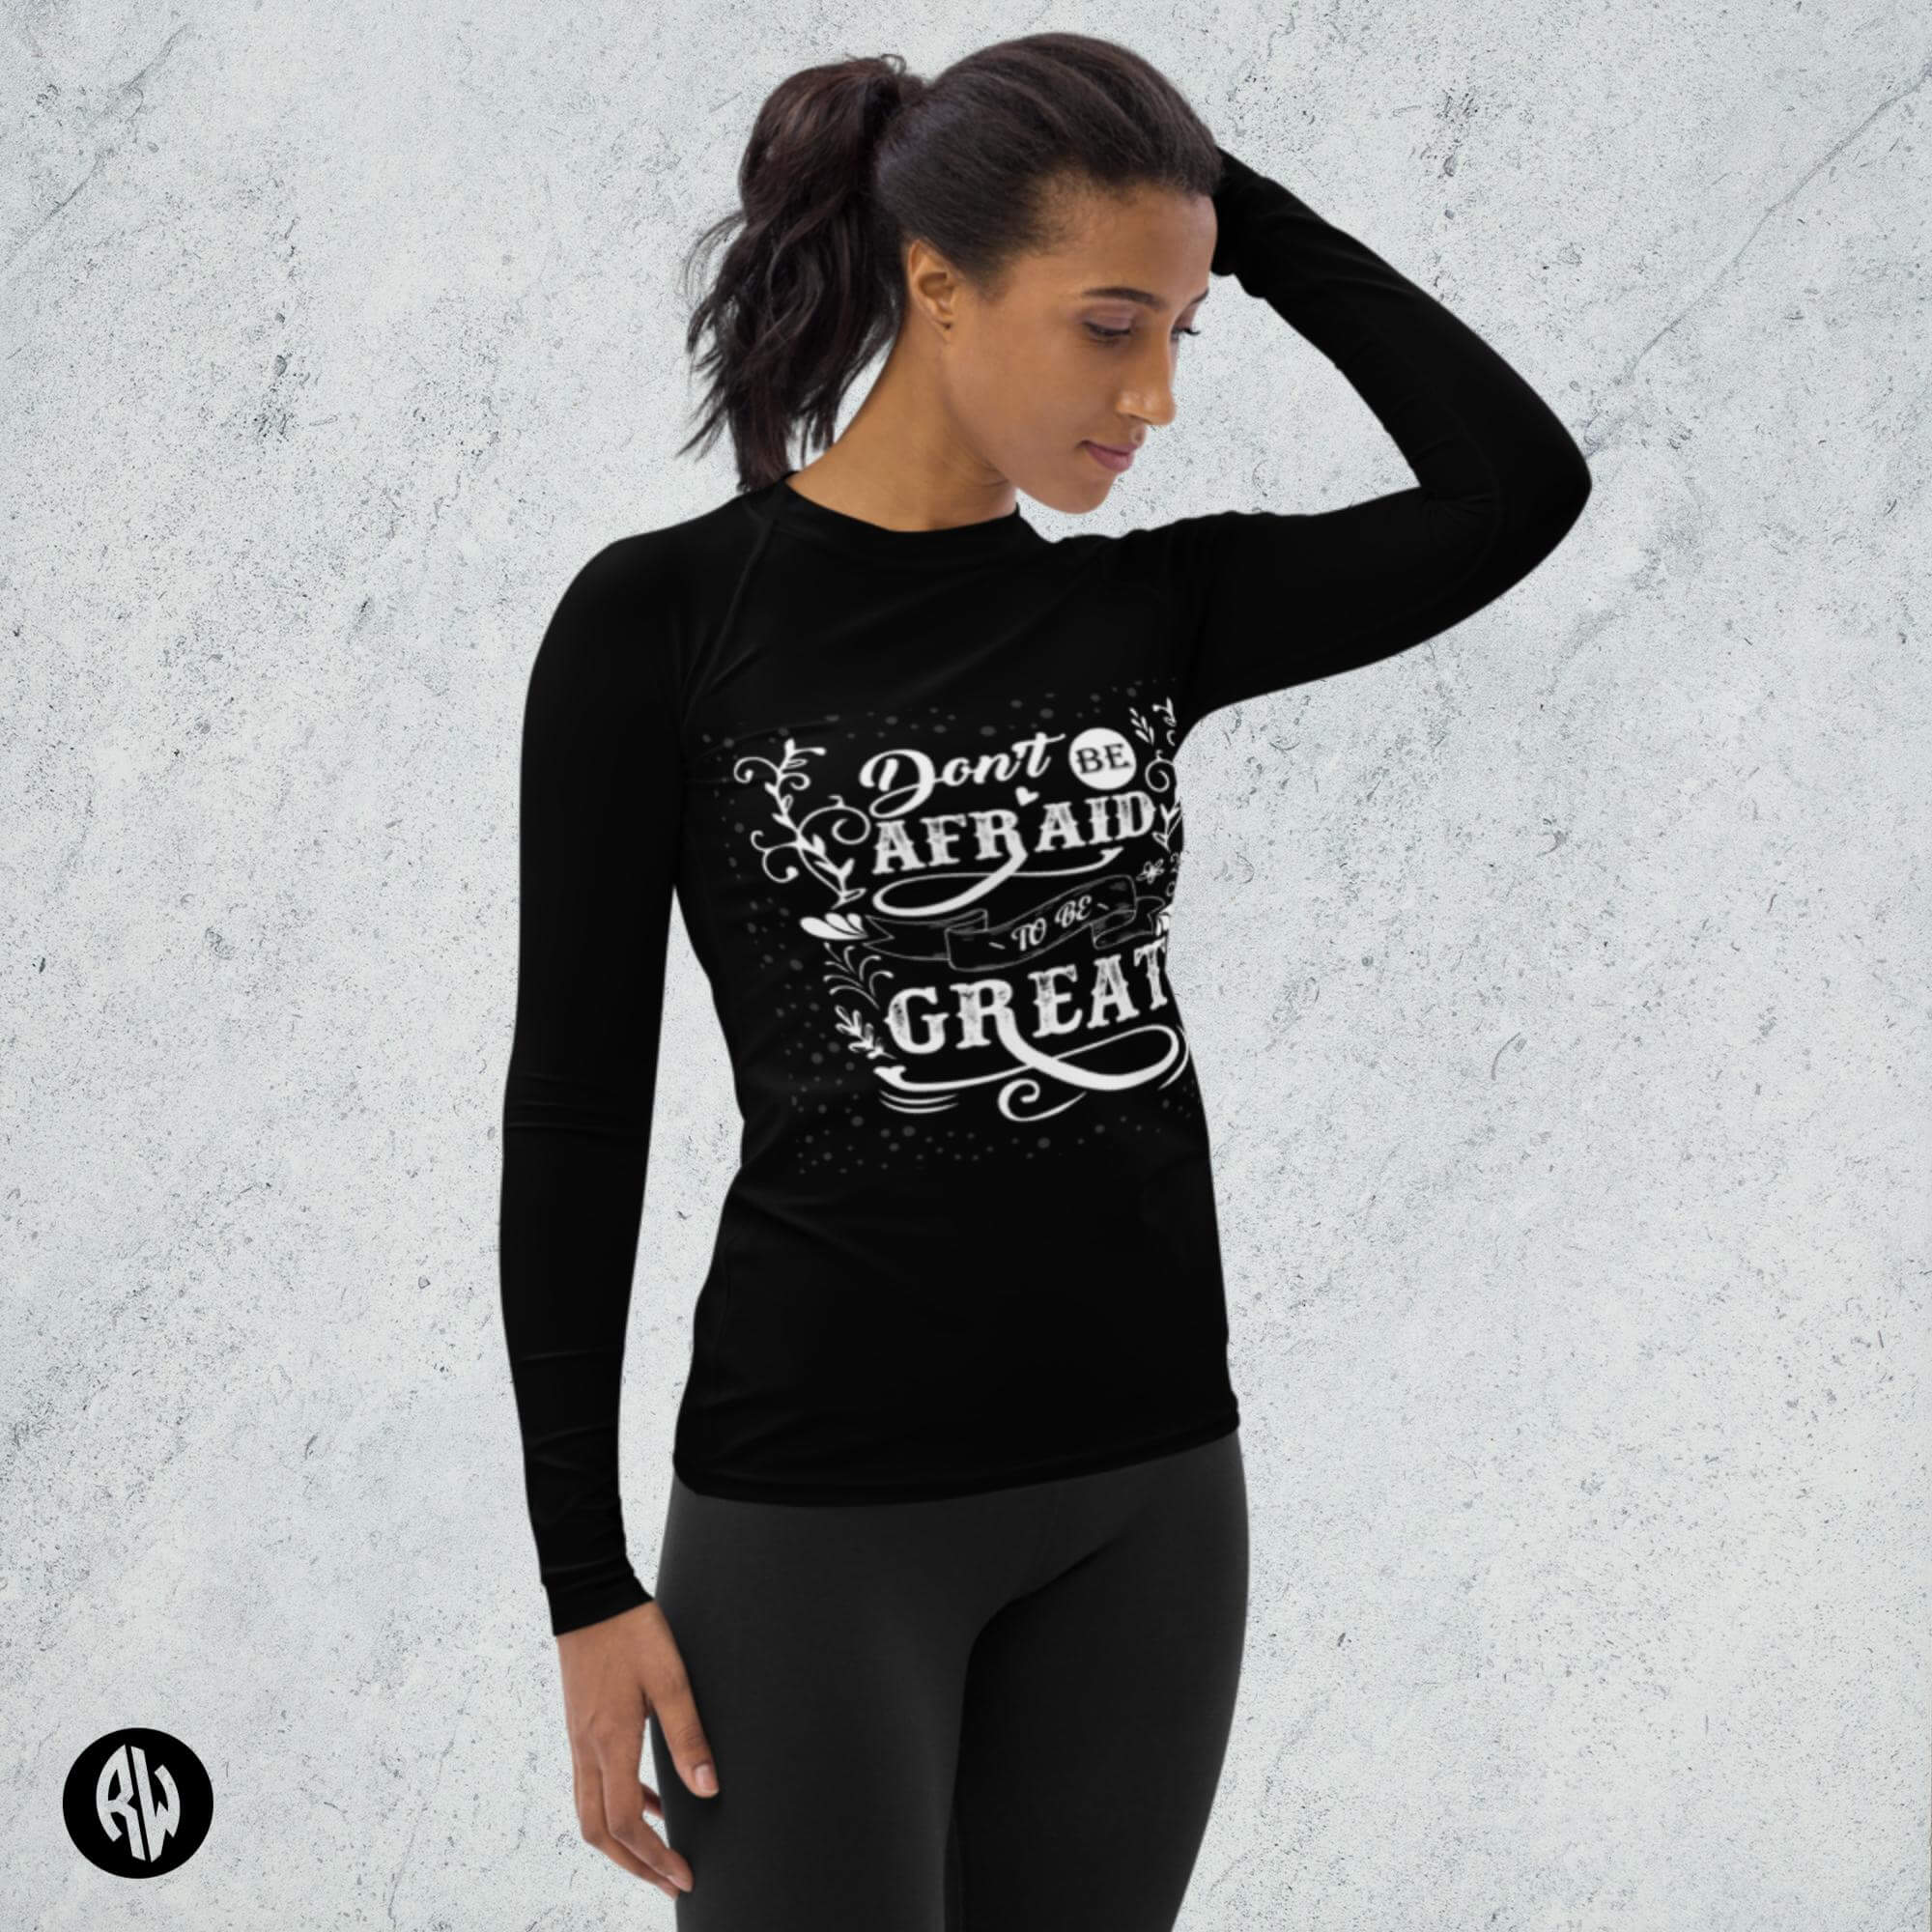 Women's Black Long Sleeve Rash Guard - Revive Wear     Shop Women's Black Long Sleeve Rash Guard $76.00 UPF 50+ protection. Subscribe and receive your first 10% Discount at Revive Wear..